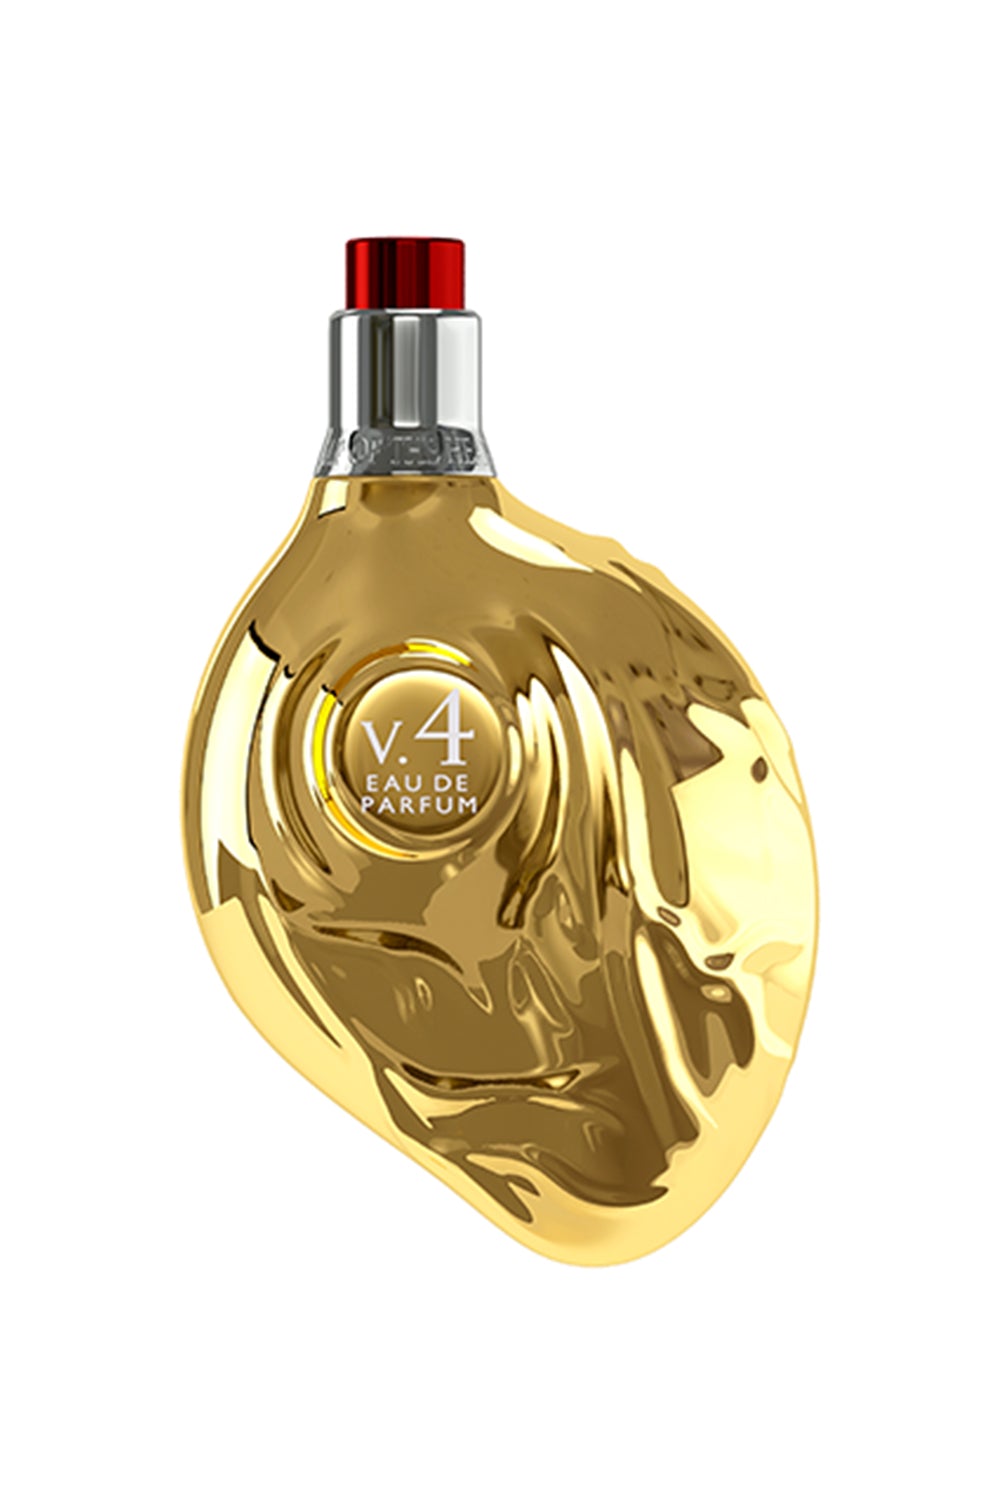 MAP OF THE HEART LIFESTYLE GOLD GOLD HEART V.4 90ML